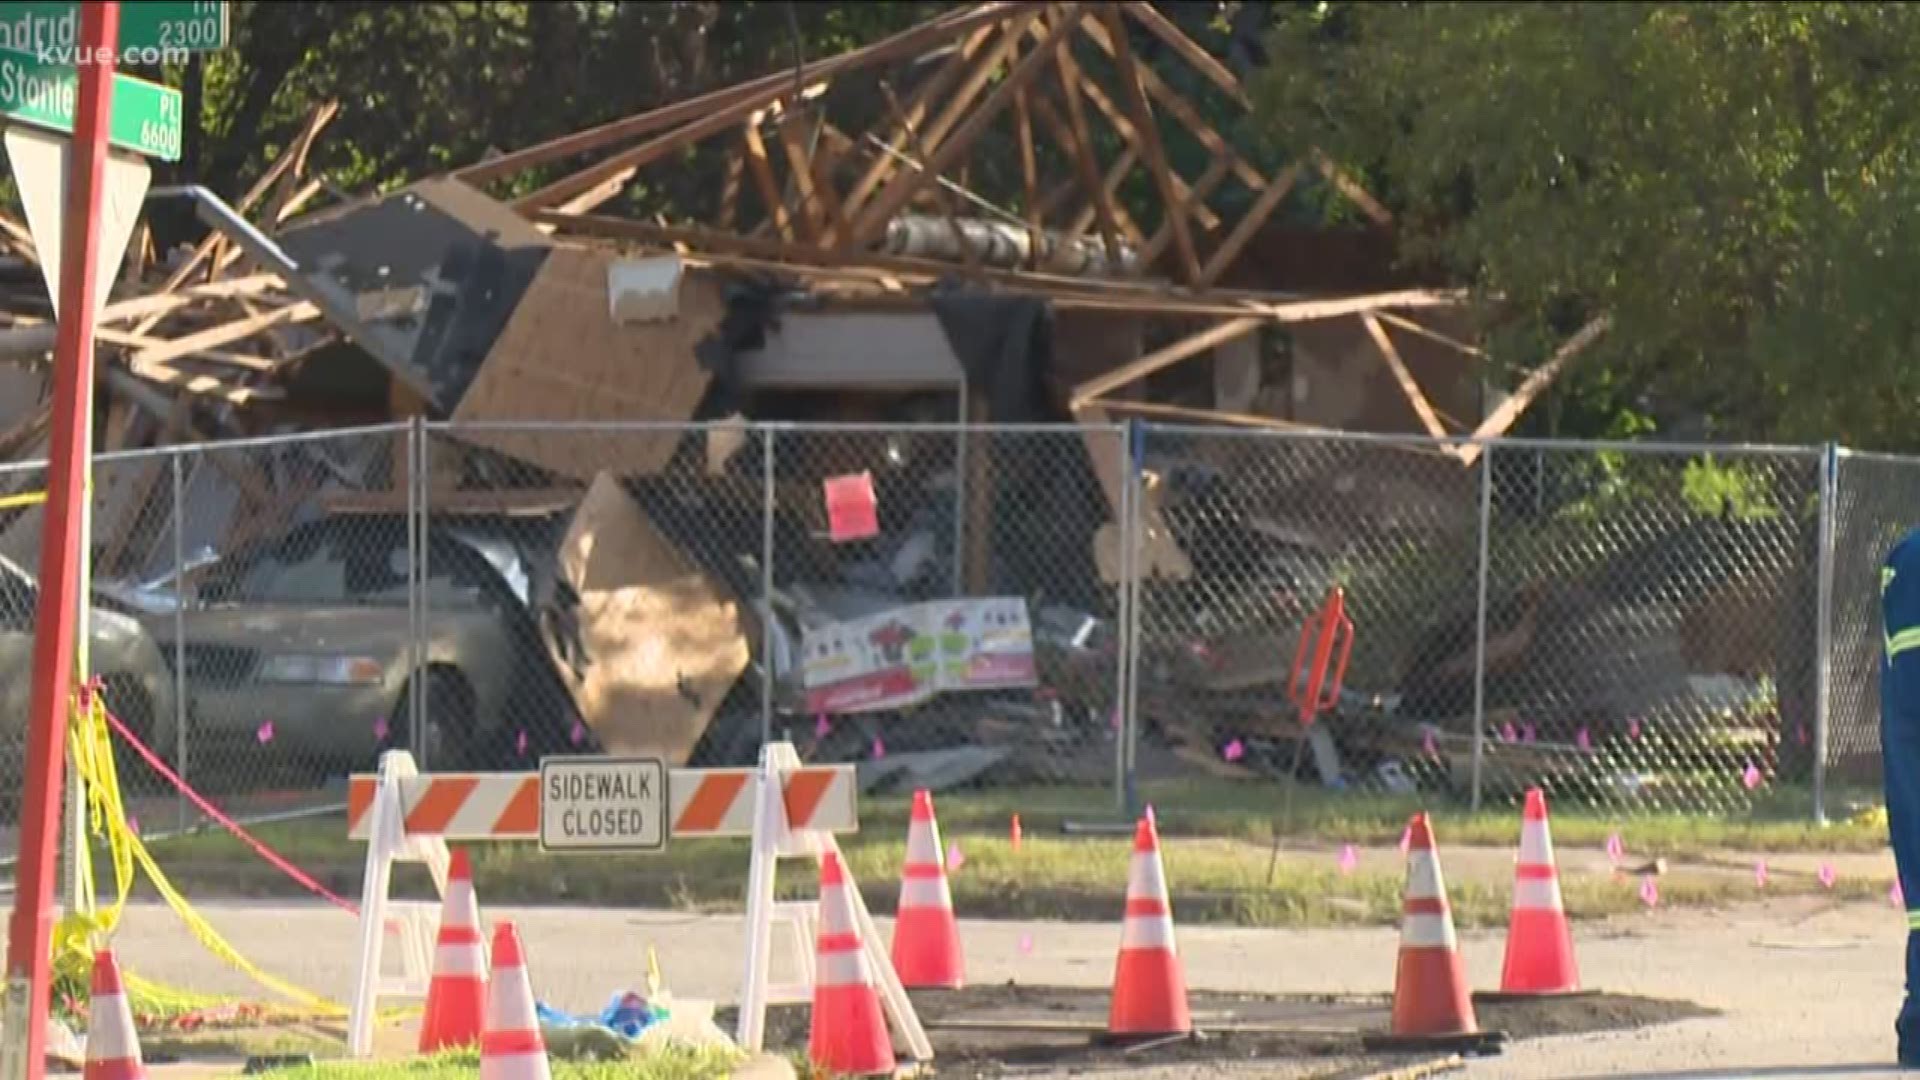 A woman who was seriously injured in a home explosion in Southeast Austin has died, according to medical officials.